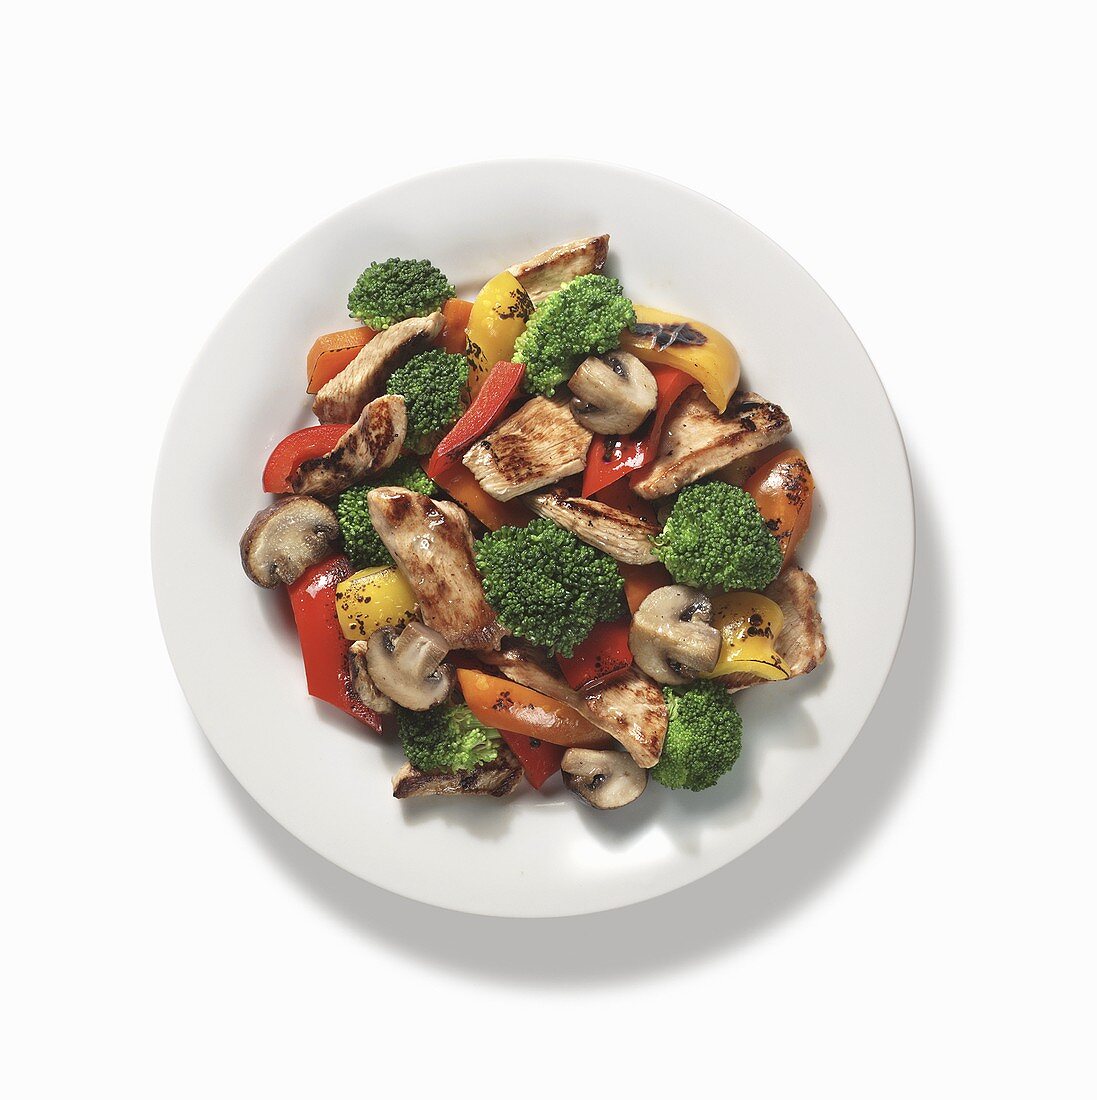 Chicken and Vegetables on a White Plate